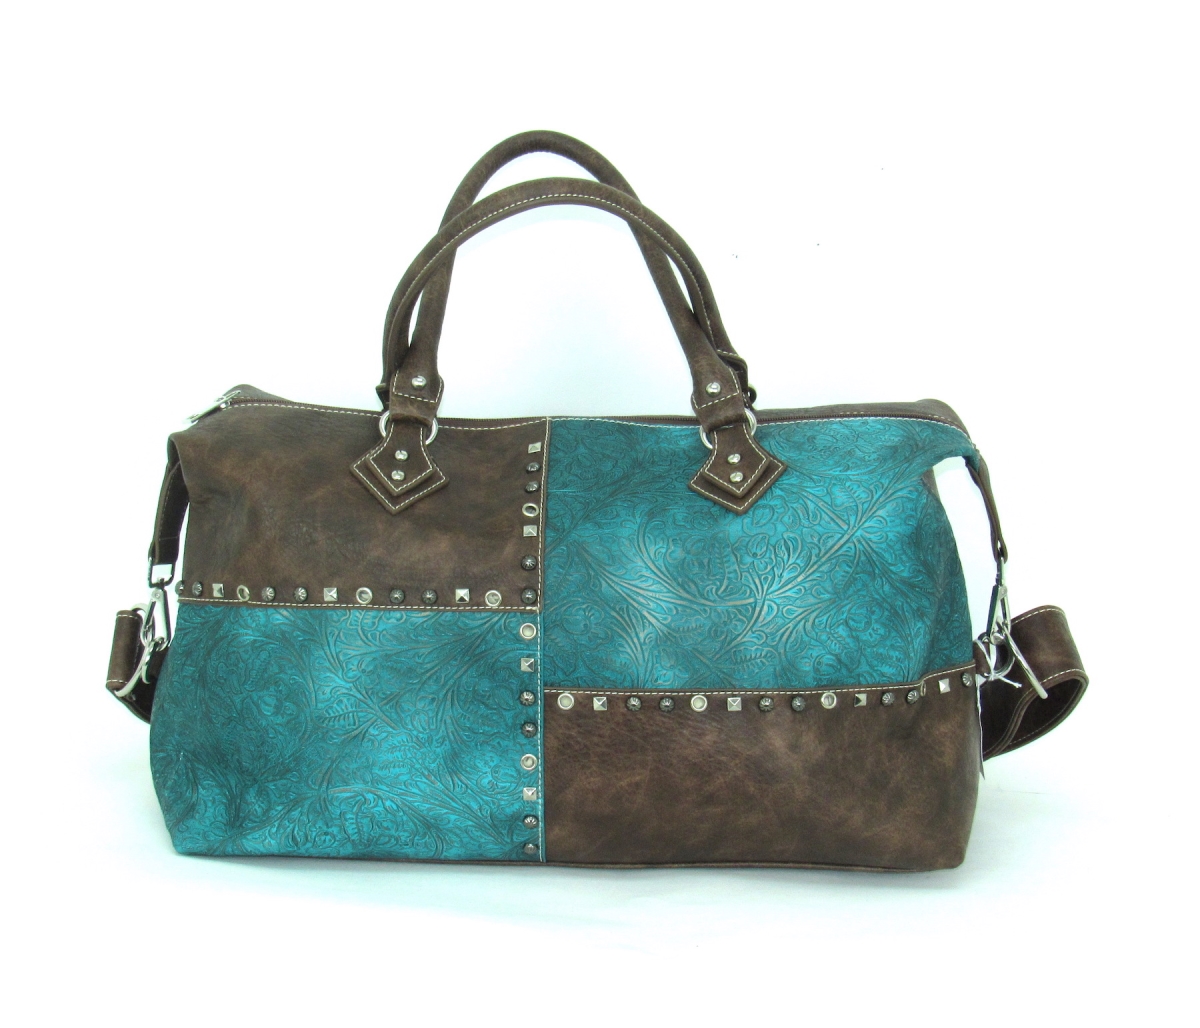 No.pa-160 Tq Ladies Faux Leather Patchwork Duffle Bag, Turquoise